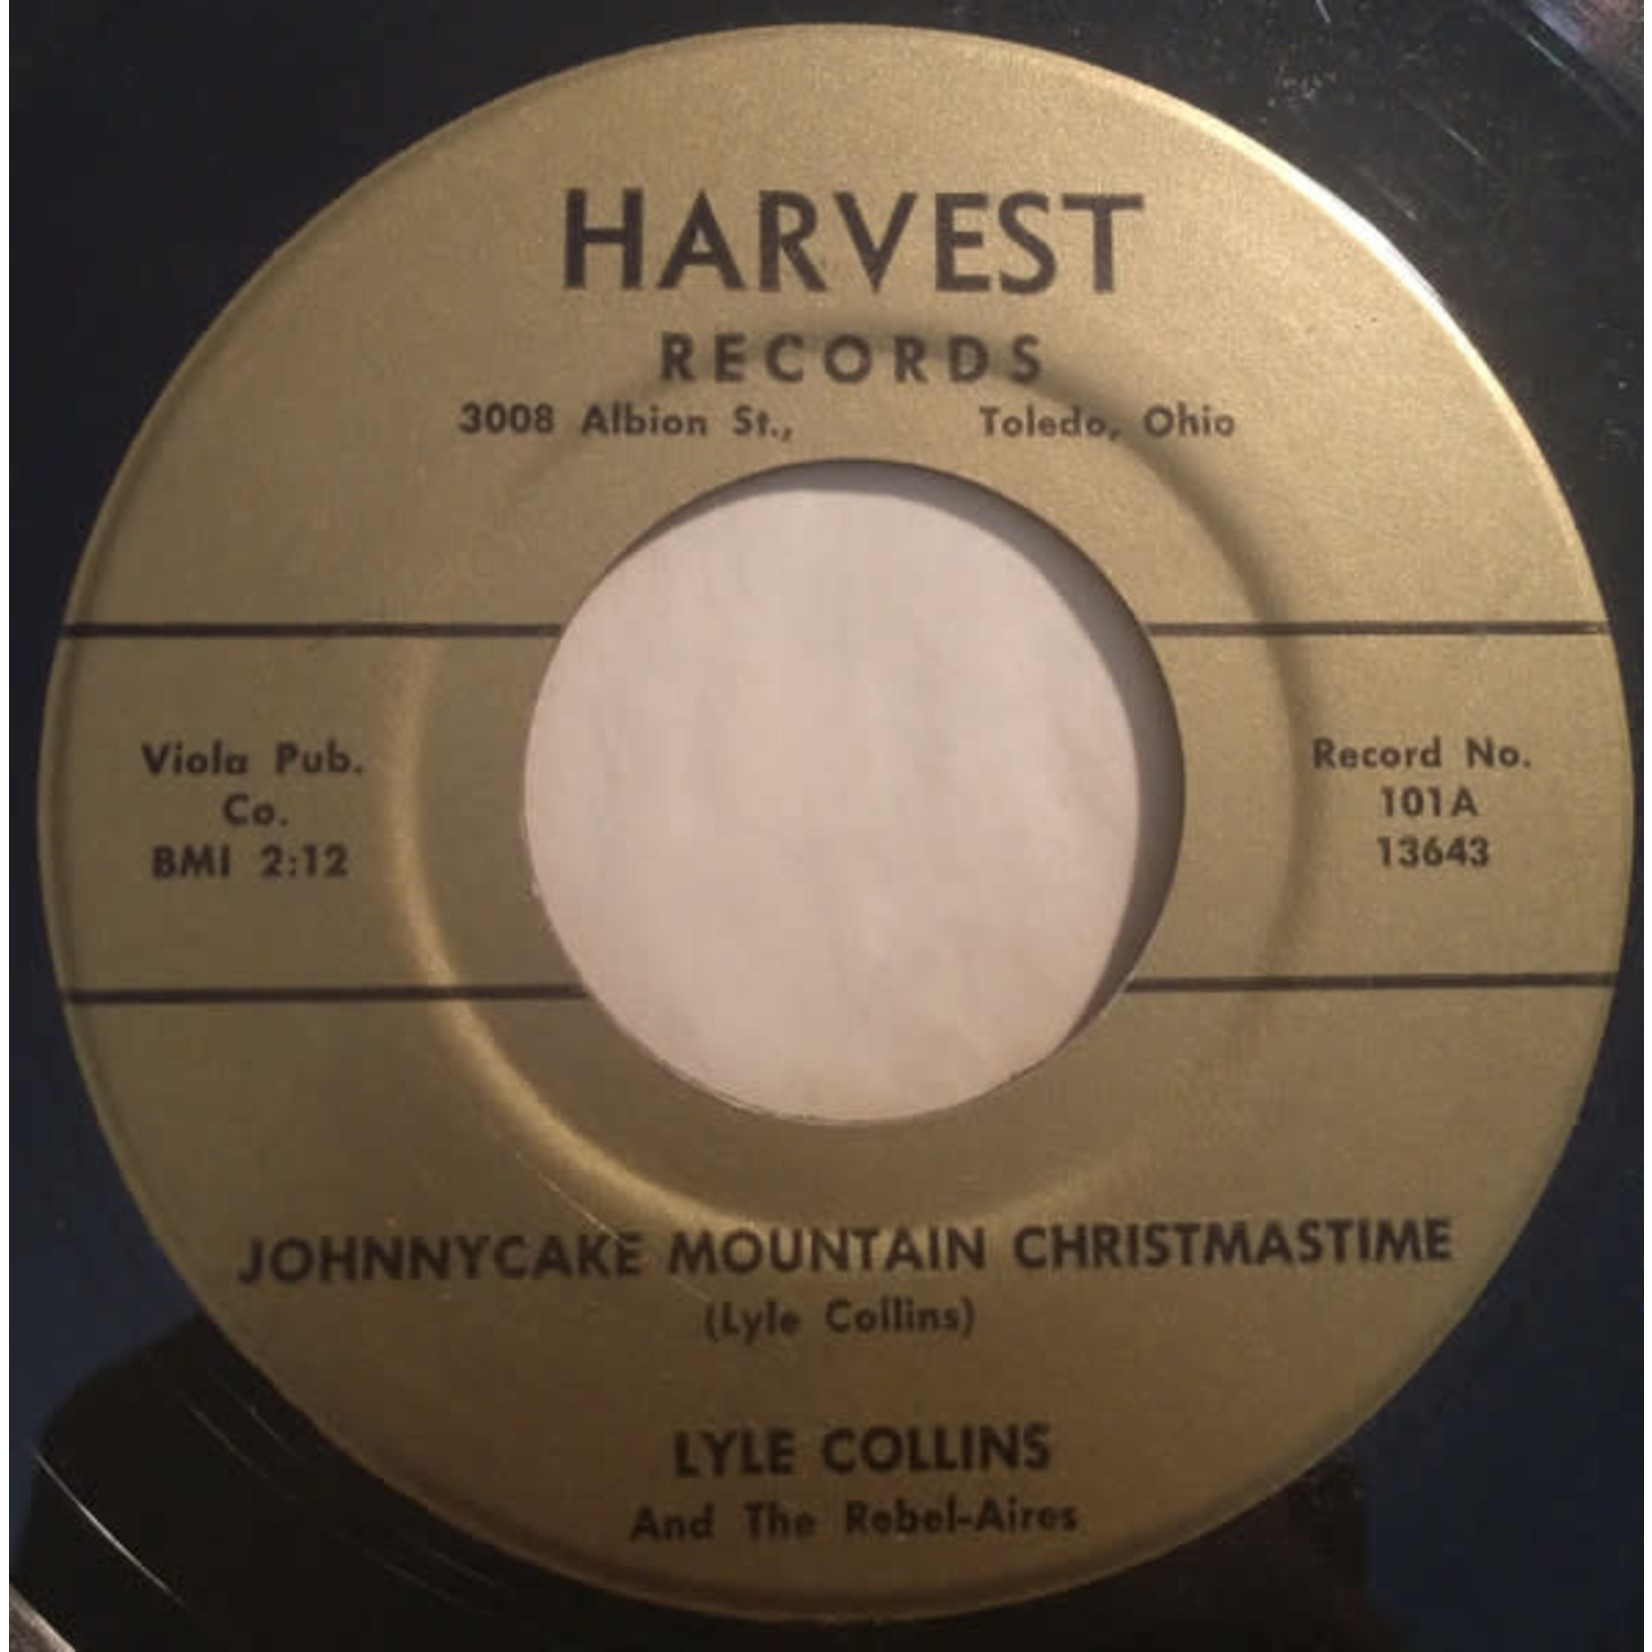 Harvest Lyle Collins And The Rebel-Aires ‎- Johnnycake Mountain Christmastime (7") {G+}